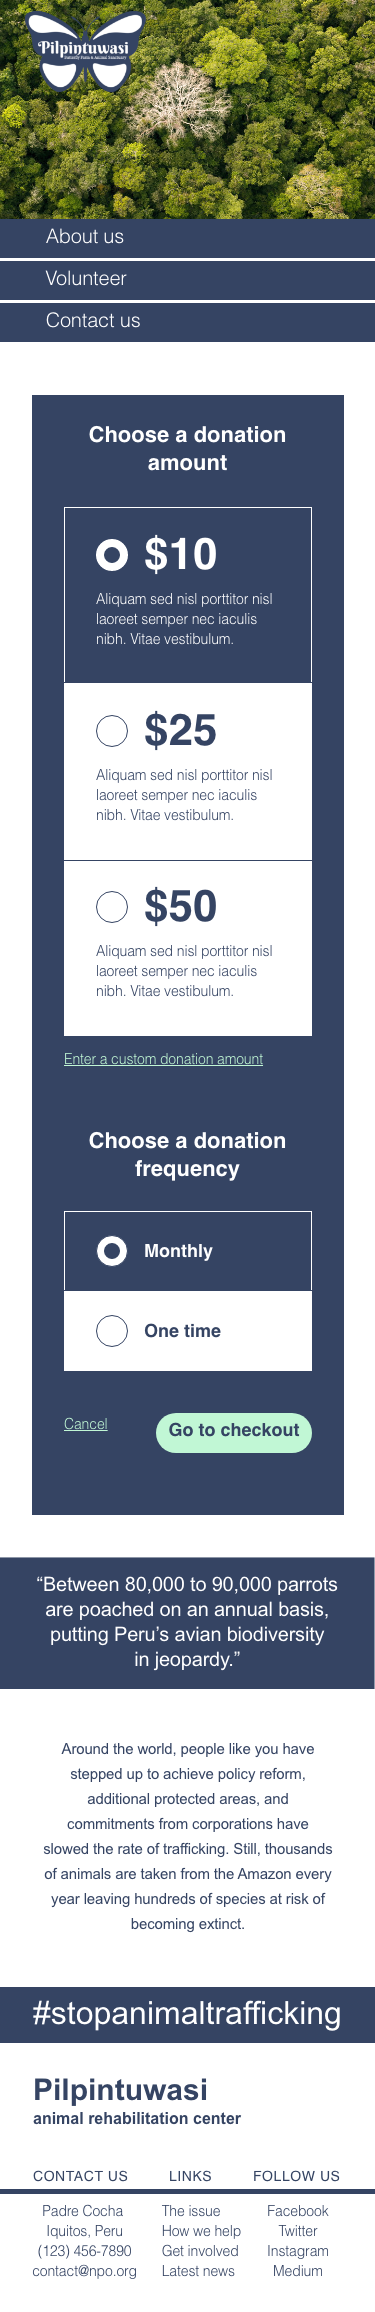 Mobile donation page 1